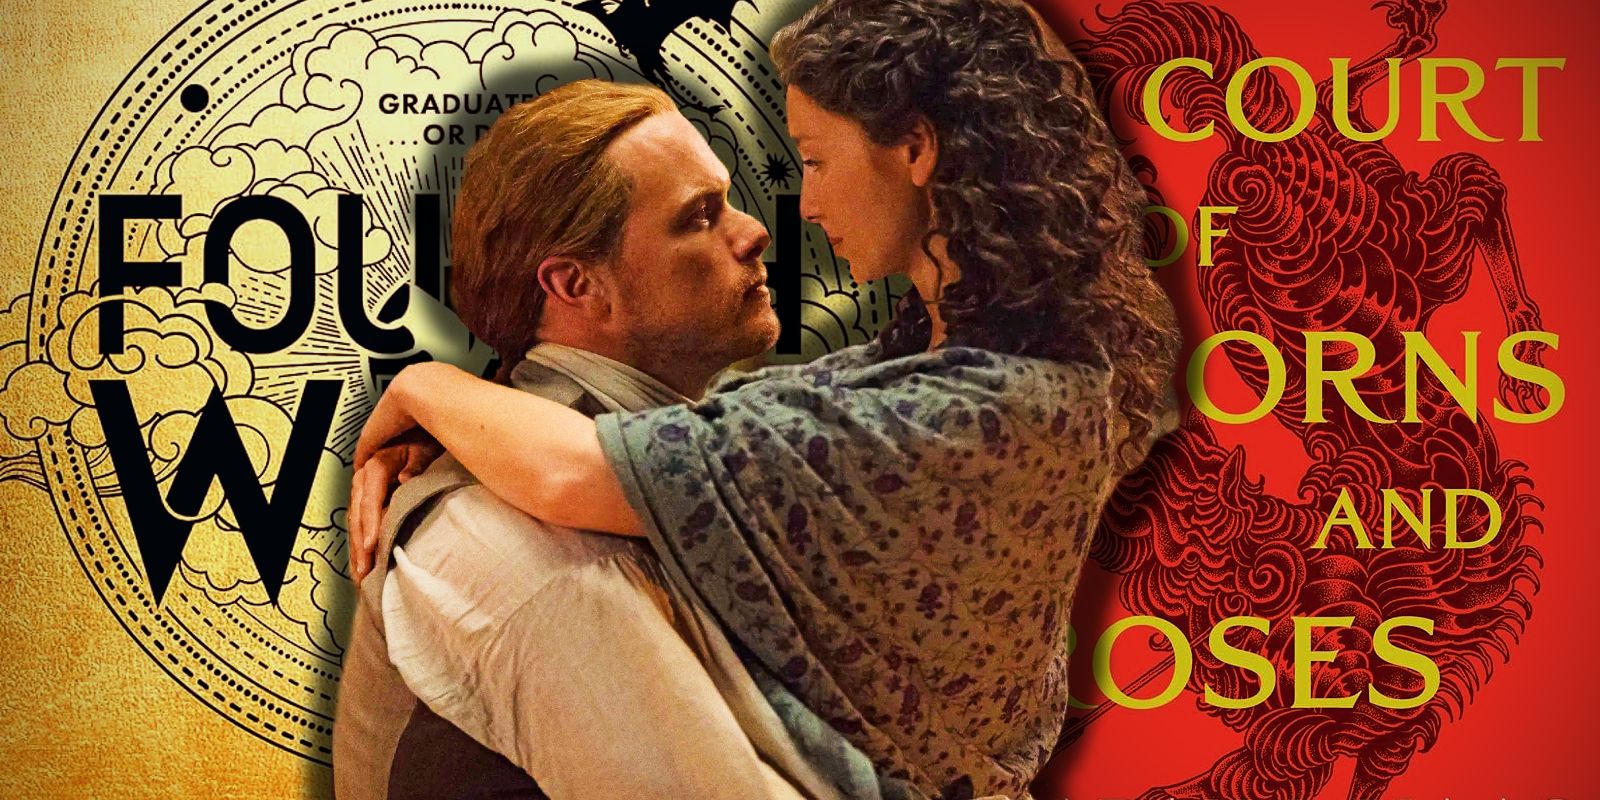 This custom image shows Jamie and Claire from Outlander in front of the ACOTAR and Fourth Wing book covers.